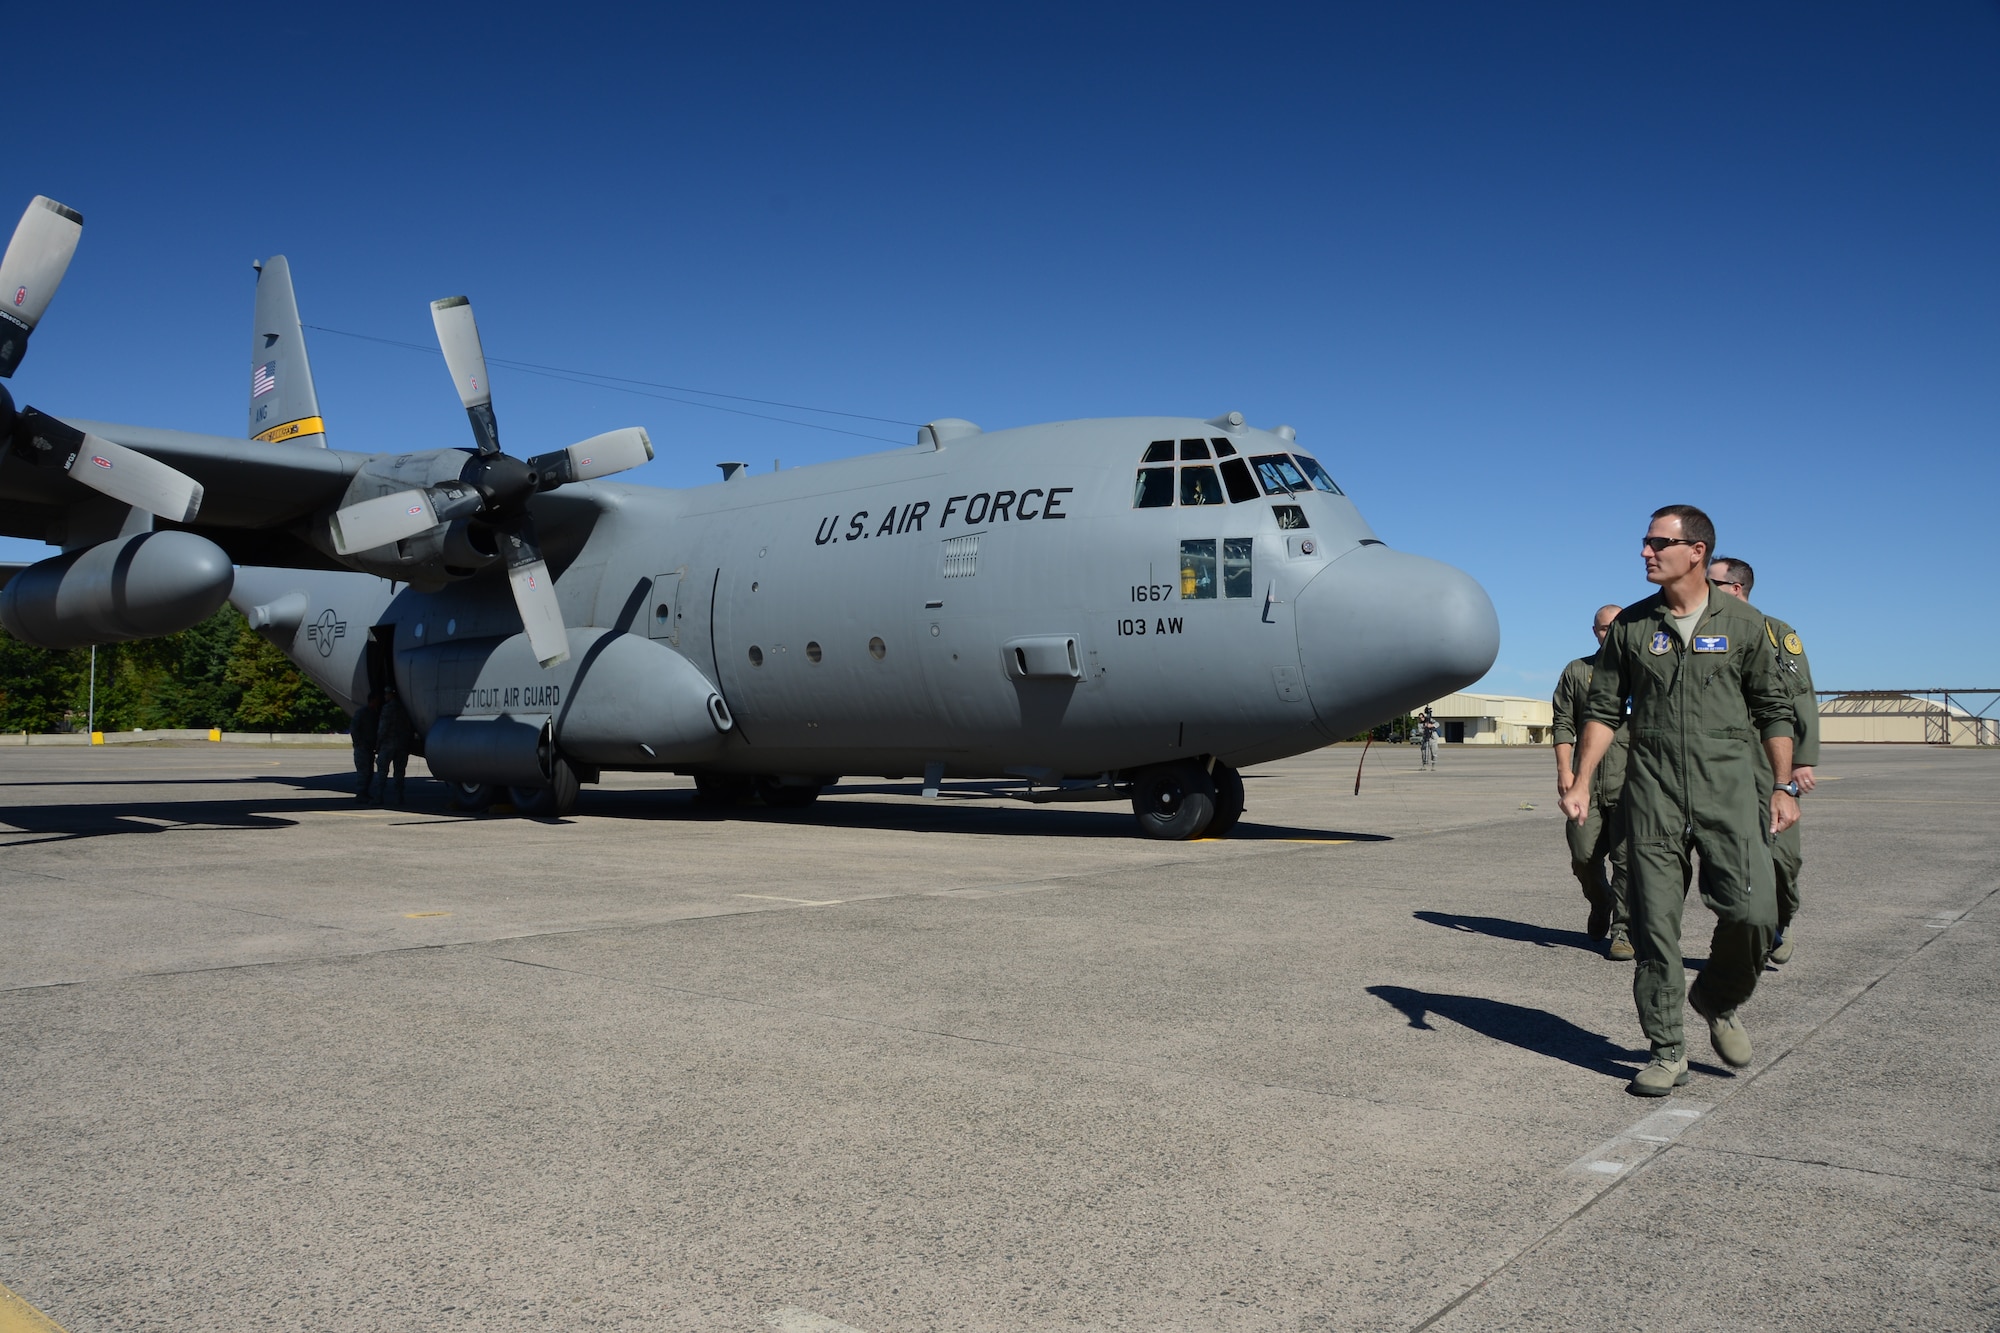 Col. Frank Detorie, commander of the 103rd Airlift Wing, looks back at the first of eight C-130H aircraft expected to be assigned to the Connecticut Air National Guard’s 103rd Airlift Wing after inspecting the aircraft shortly after it touched down at Bradley International Airport, Windsor Locks, Conn., Tuesday, Sept. 24, 2013. (U.S. Air National Guard photo by Master Sgt. Erin McNamara)